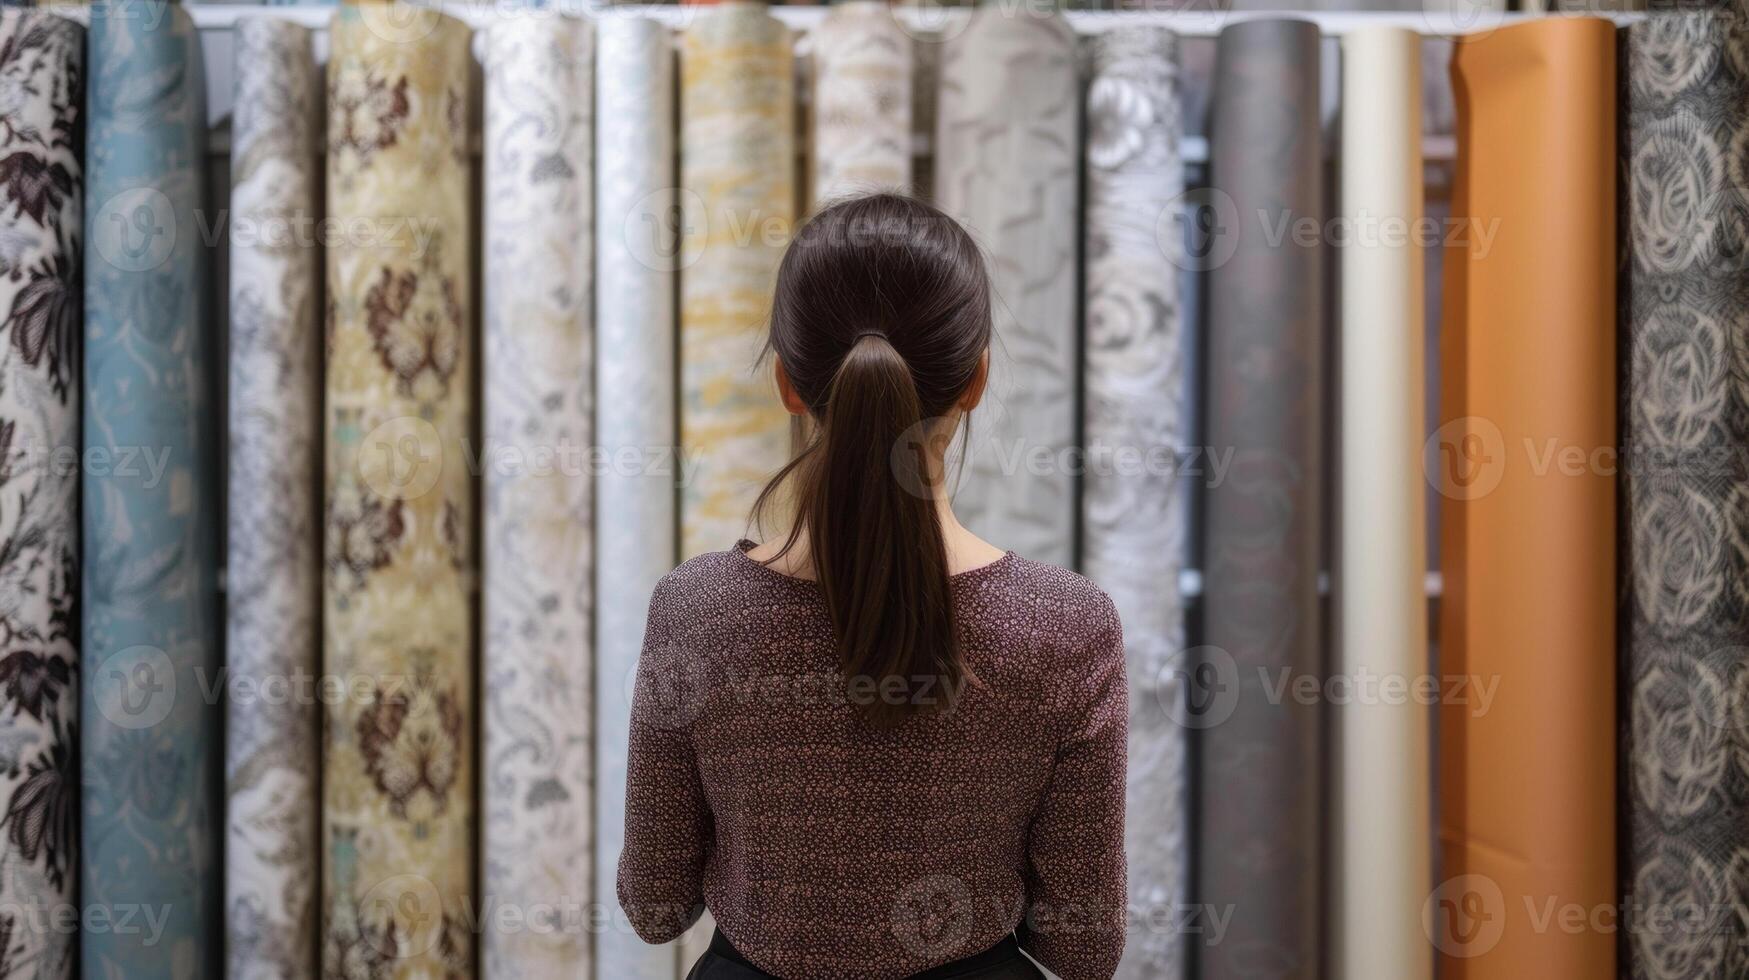 An individual standing in front of a display of different types of wallpaper trying to choose the perfect pattern and color combination for their bedroom accent wall photo